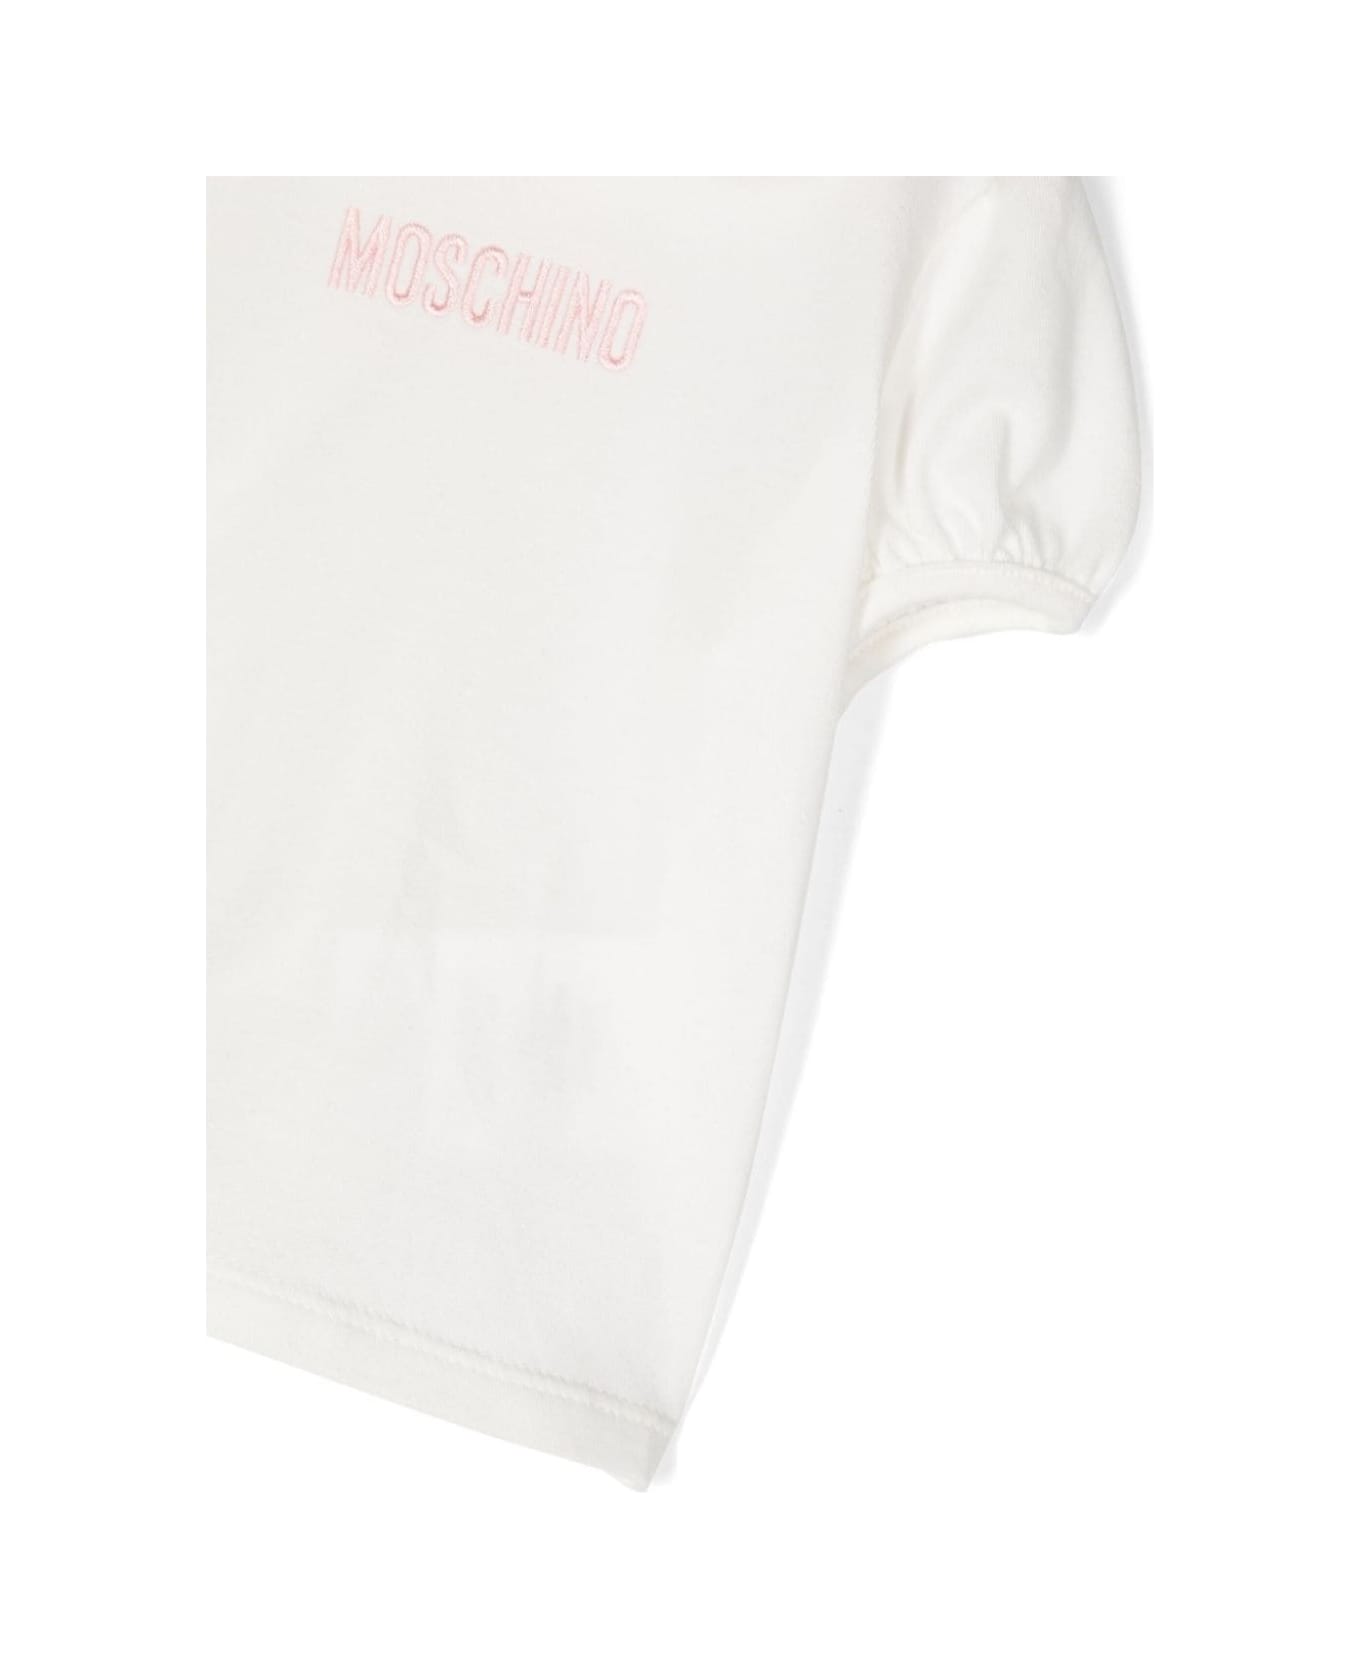 Moschino Pink Striped Overalls With Teddy Bear In Stretch Cotton Baby - White